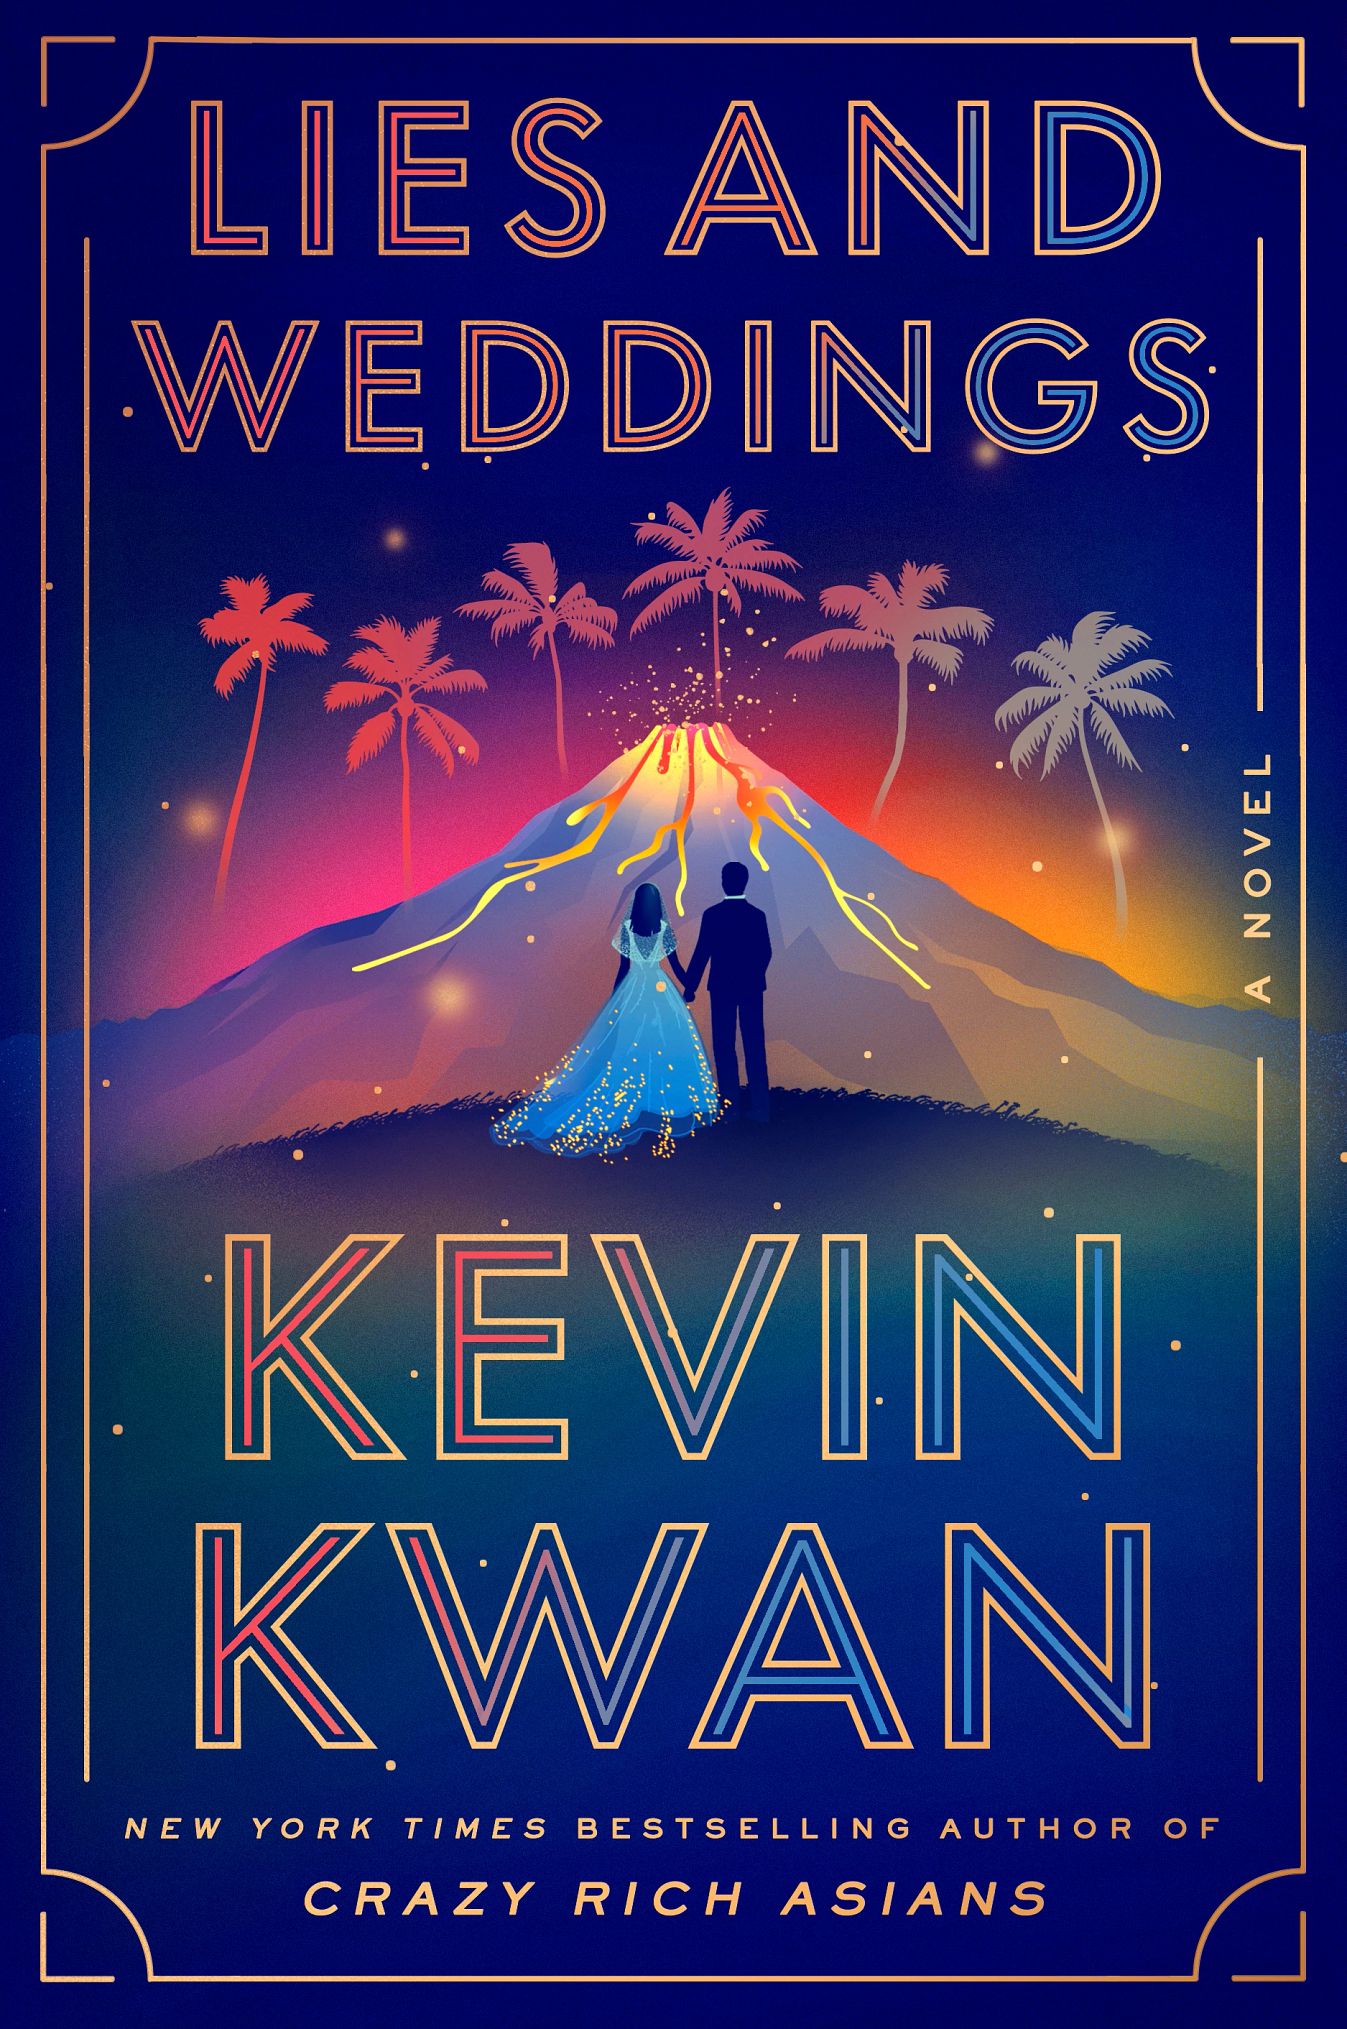 Book that says Lies and Weddings, Kevin Kwan, New York Times Bestselling Author of Crazy Rich Asians; illustration of bride and groom in front of volcano